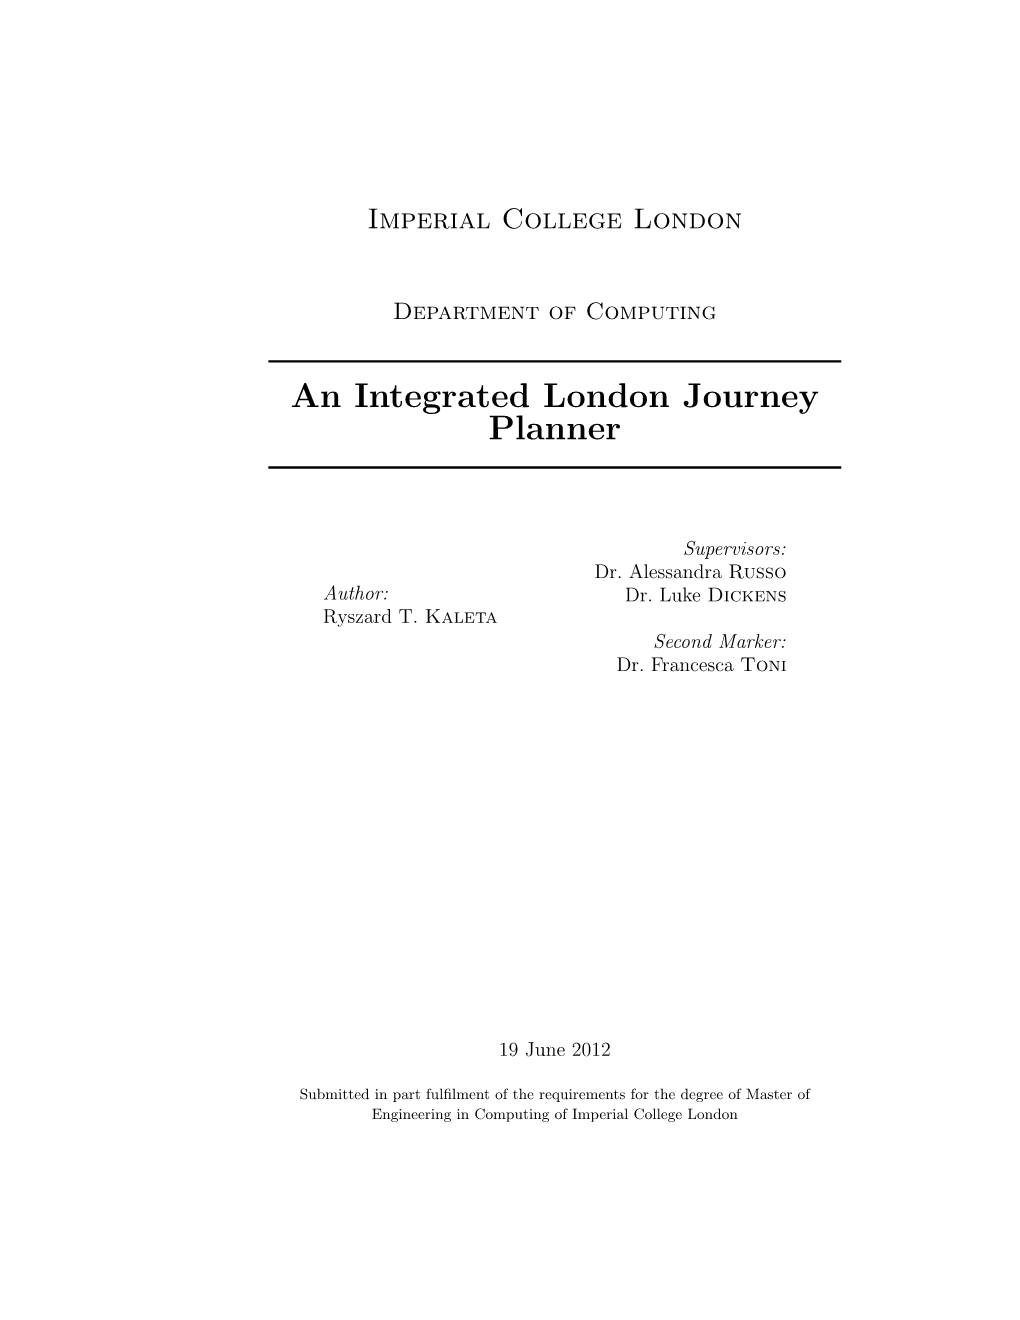 An Integrated London Journey Planner